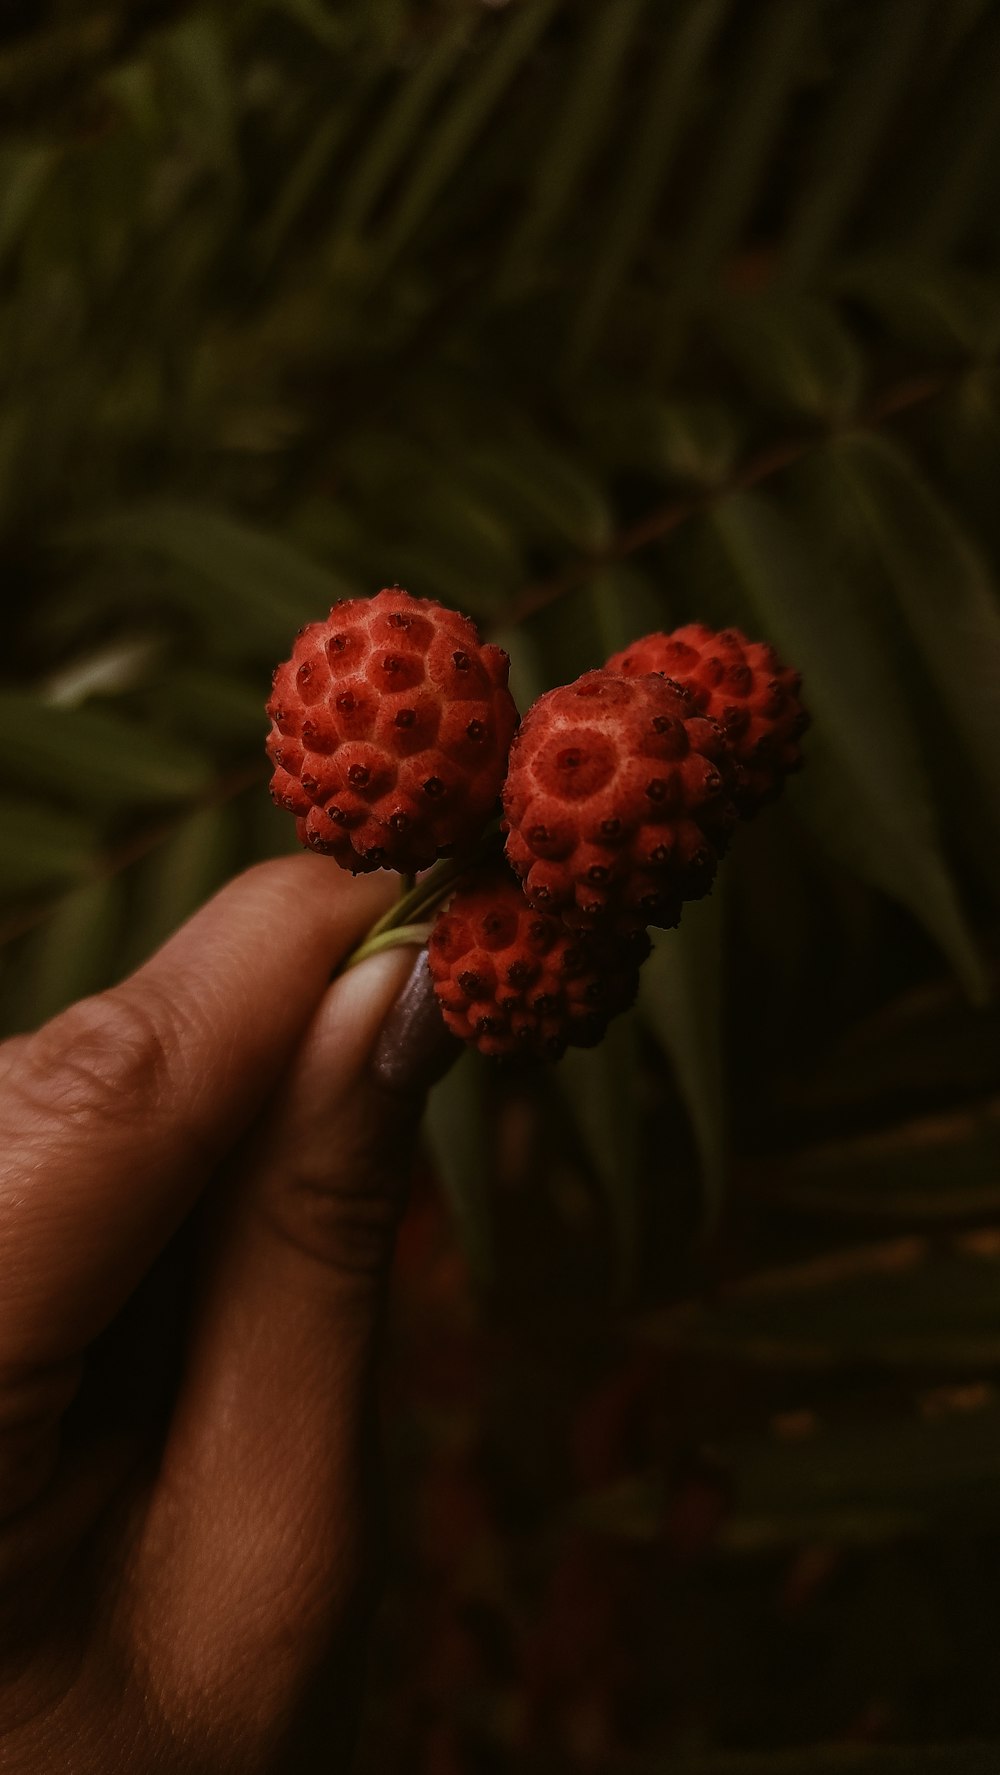 a hand holding two berries on a plant